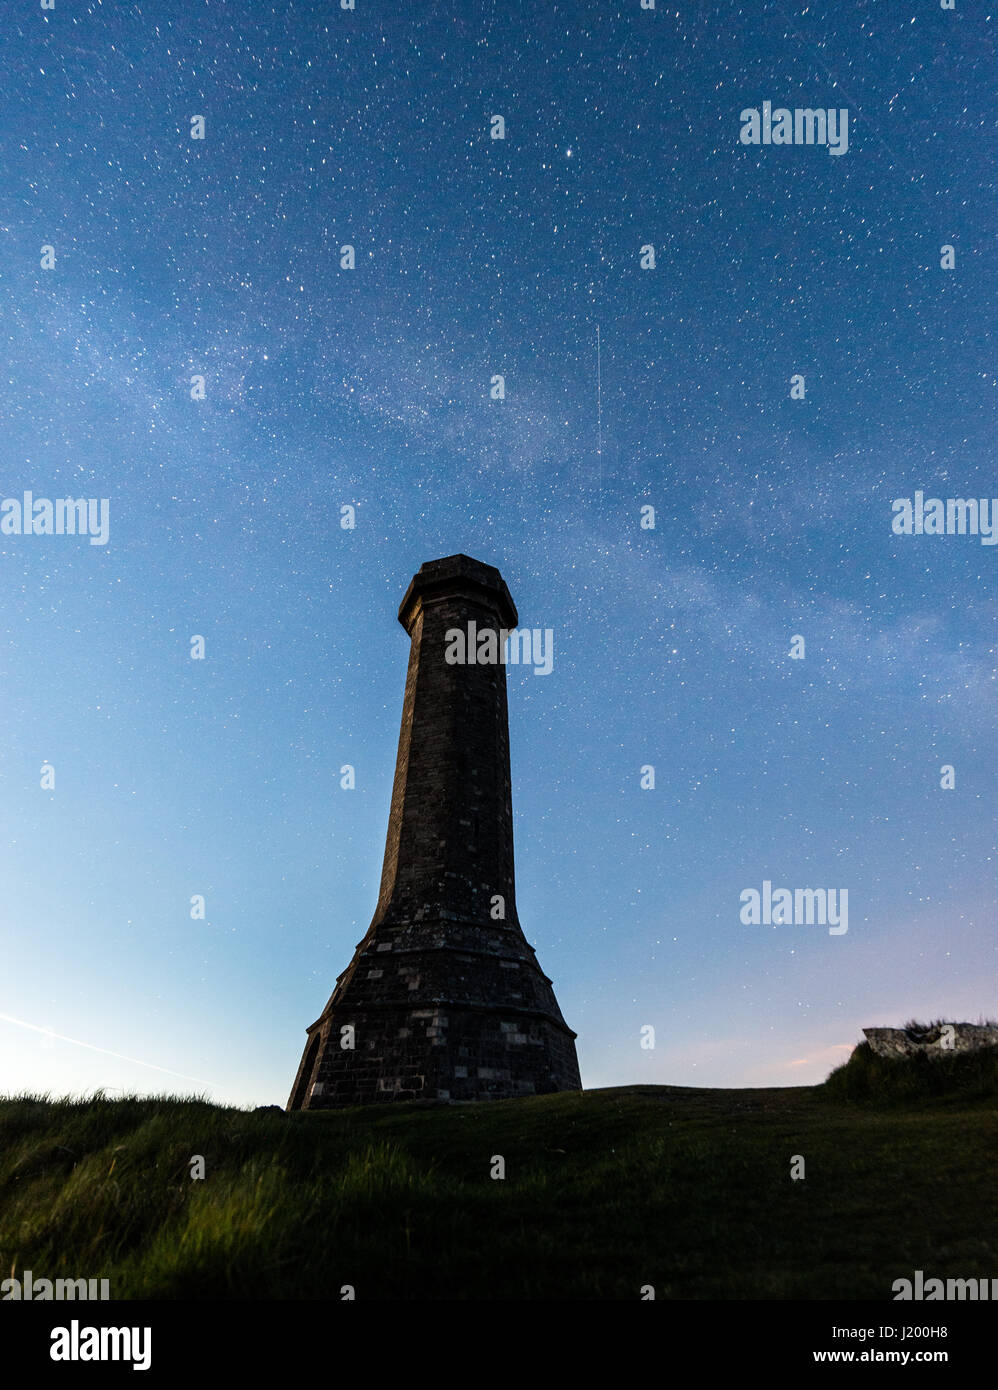 Hardy Monument, near Portesham, Dorset,UK. 23rd April 2017. Spectacular annual Lyrid meteor shower which can have up to 30 to 40er hour at its peak above the historic Hardy Monument. A single vertical metoer can be seen just above the Milky Way. Credit Dan Tucker/Alamy Live News Stock Photo